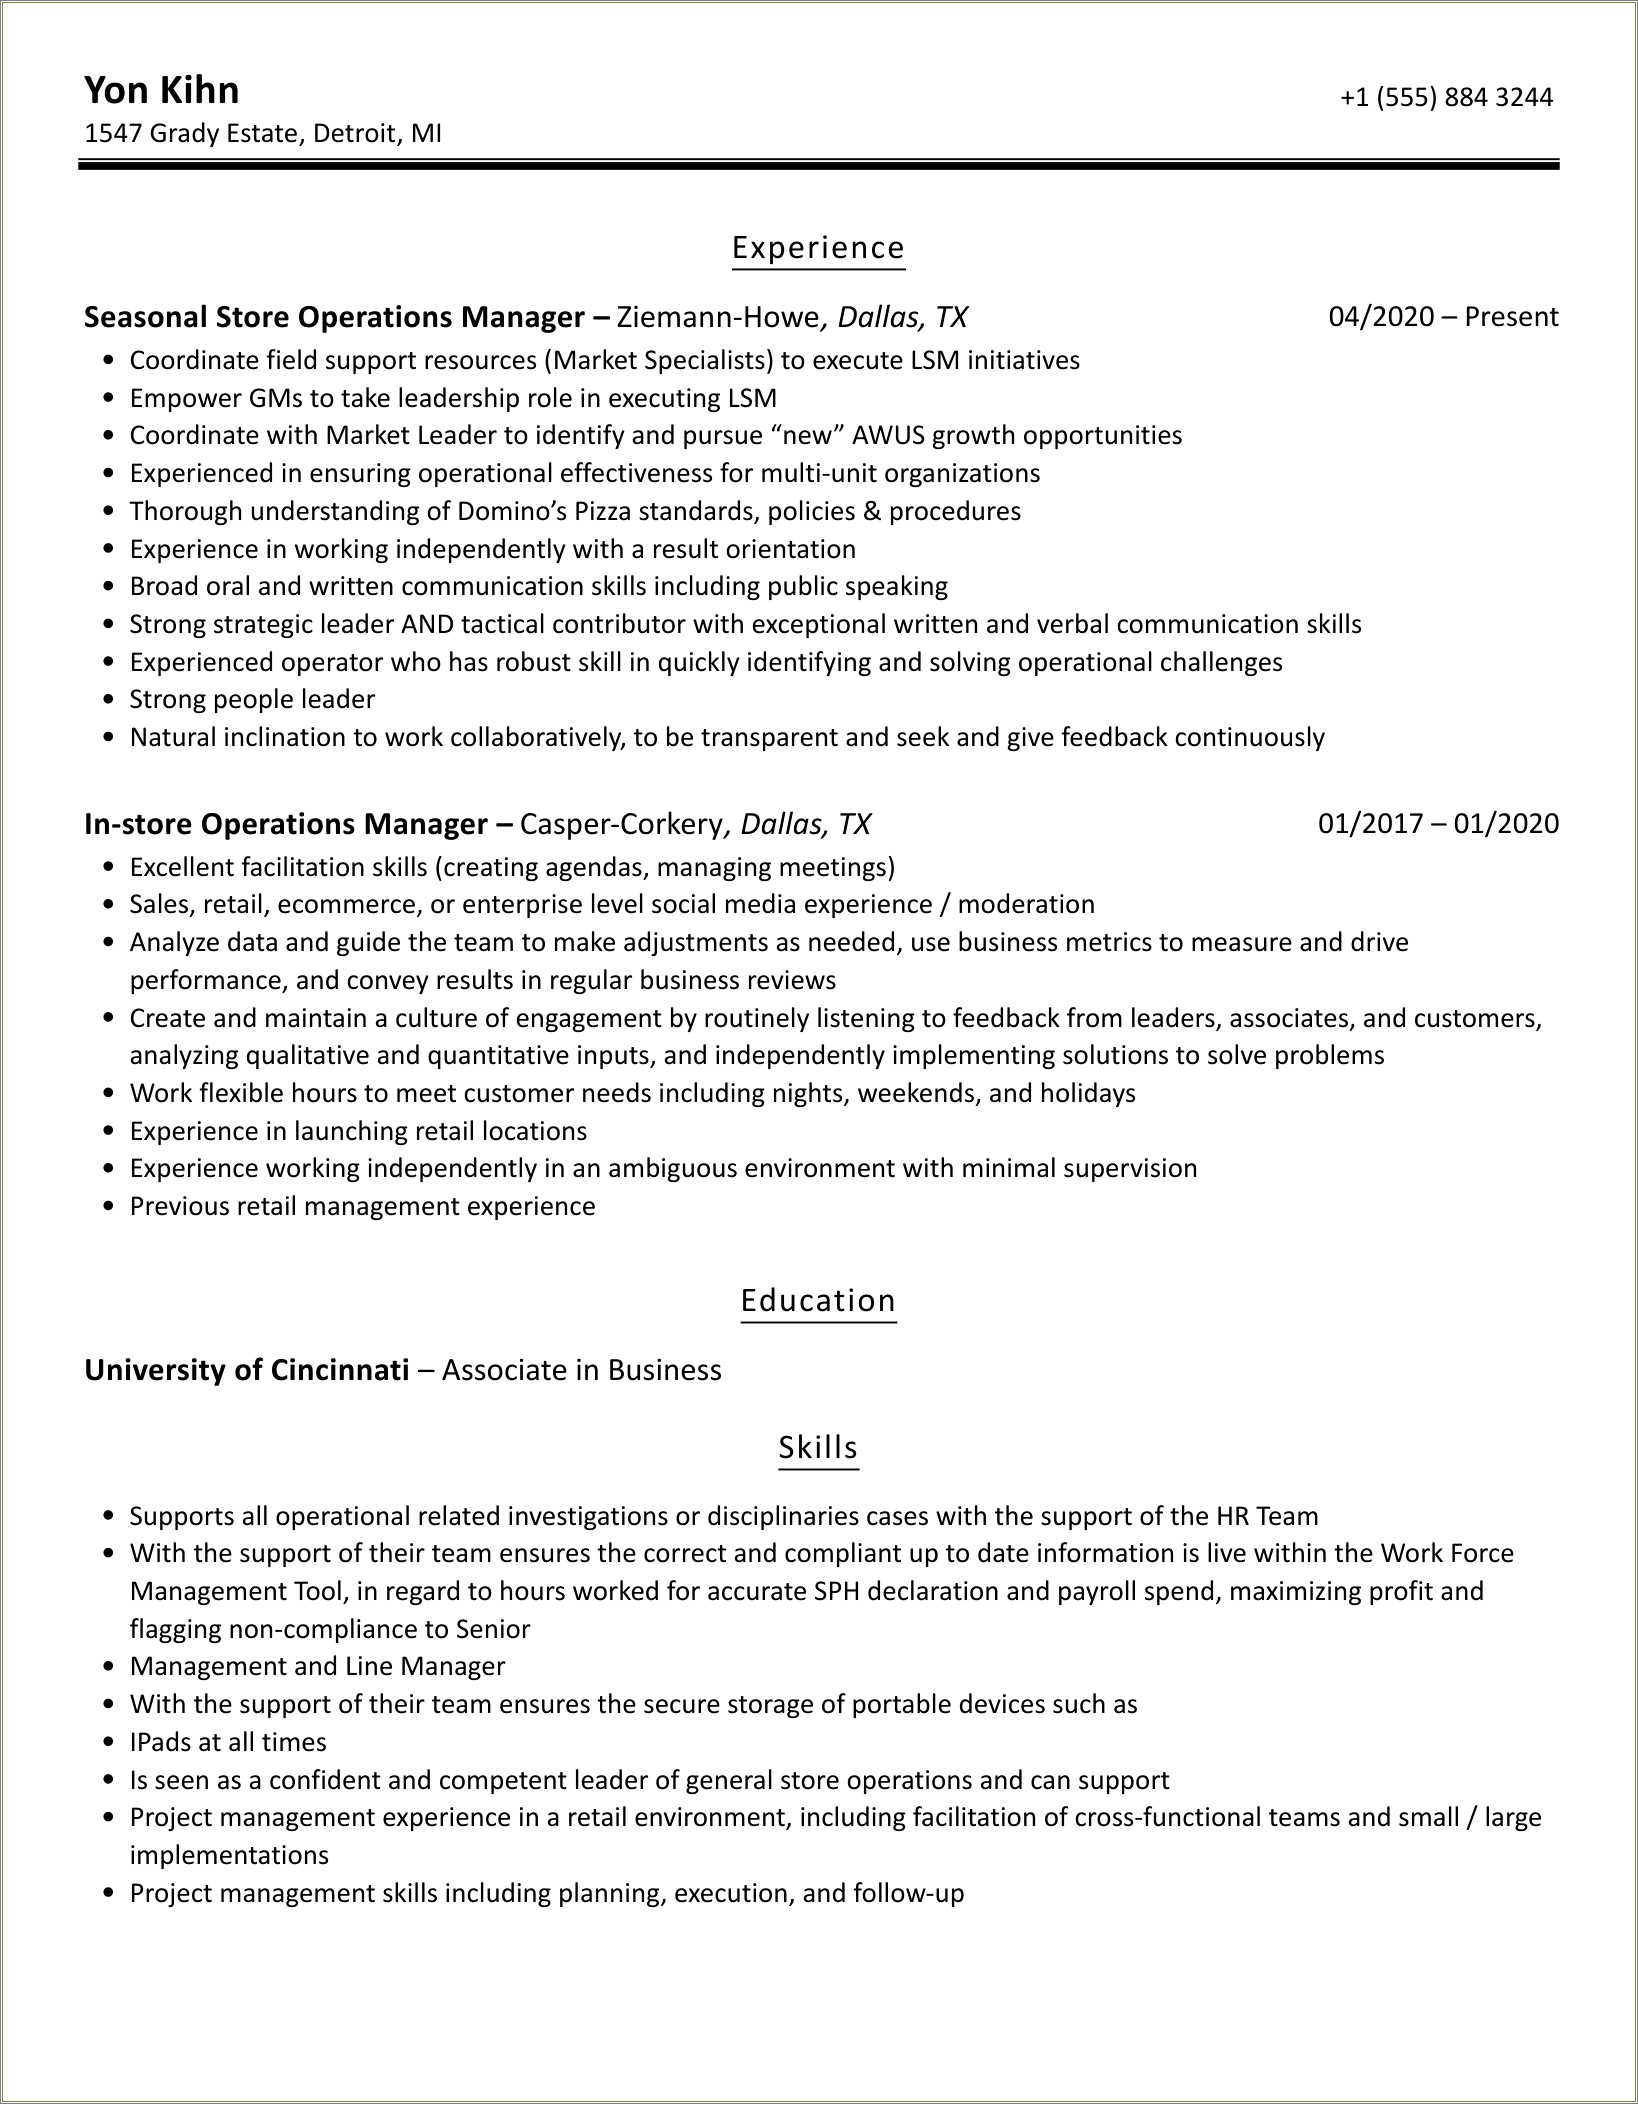 Resume Objective For Director Of Operations